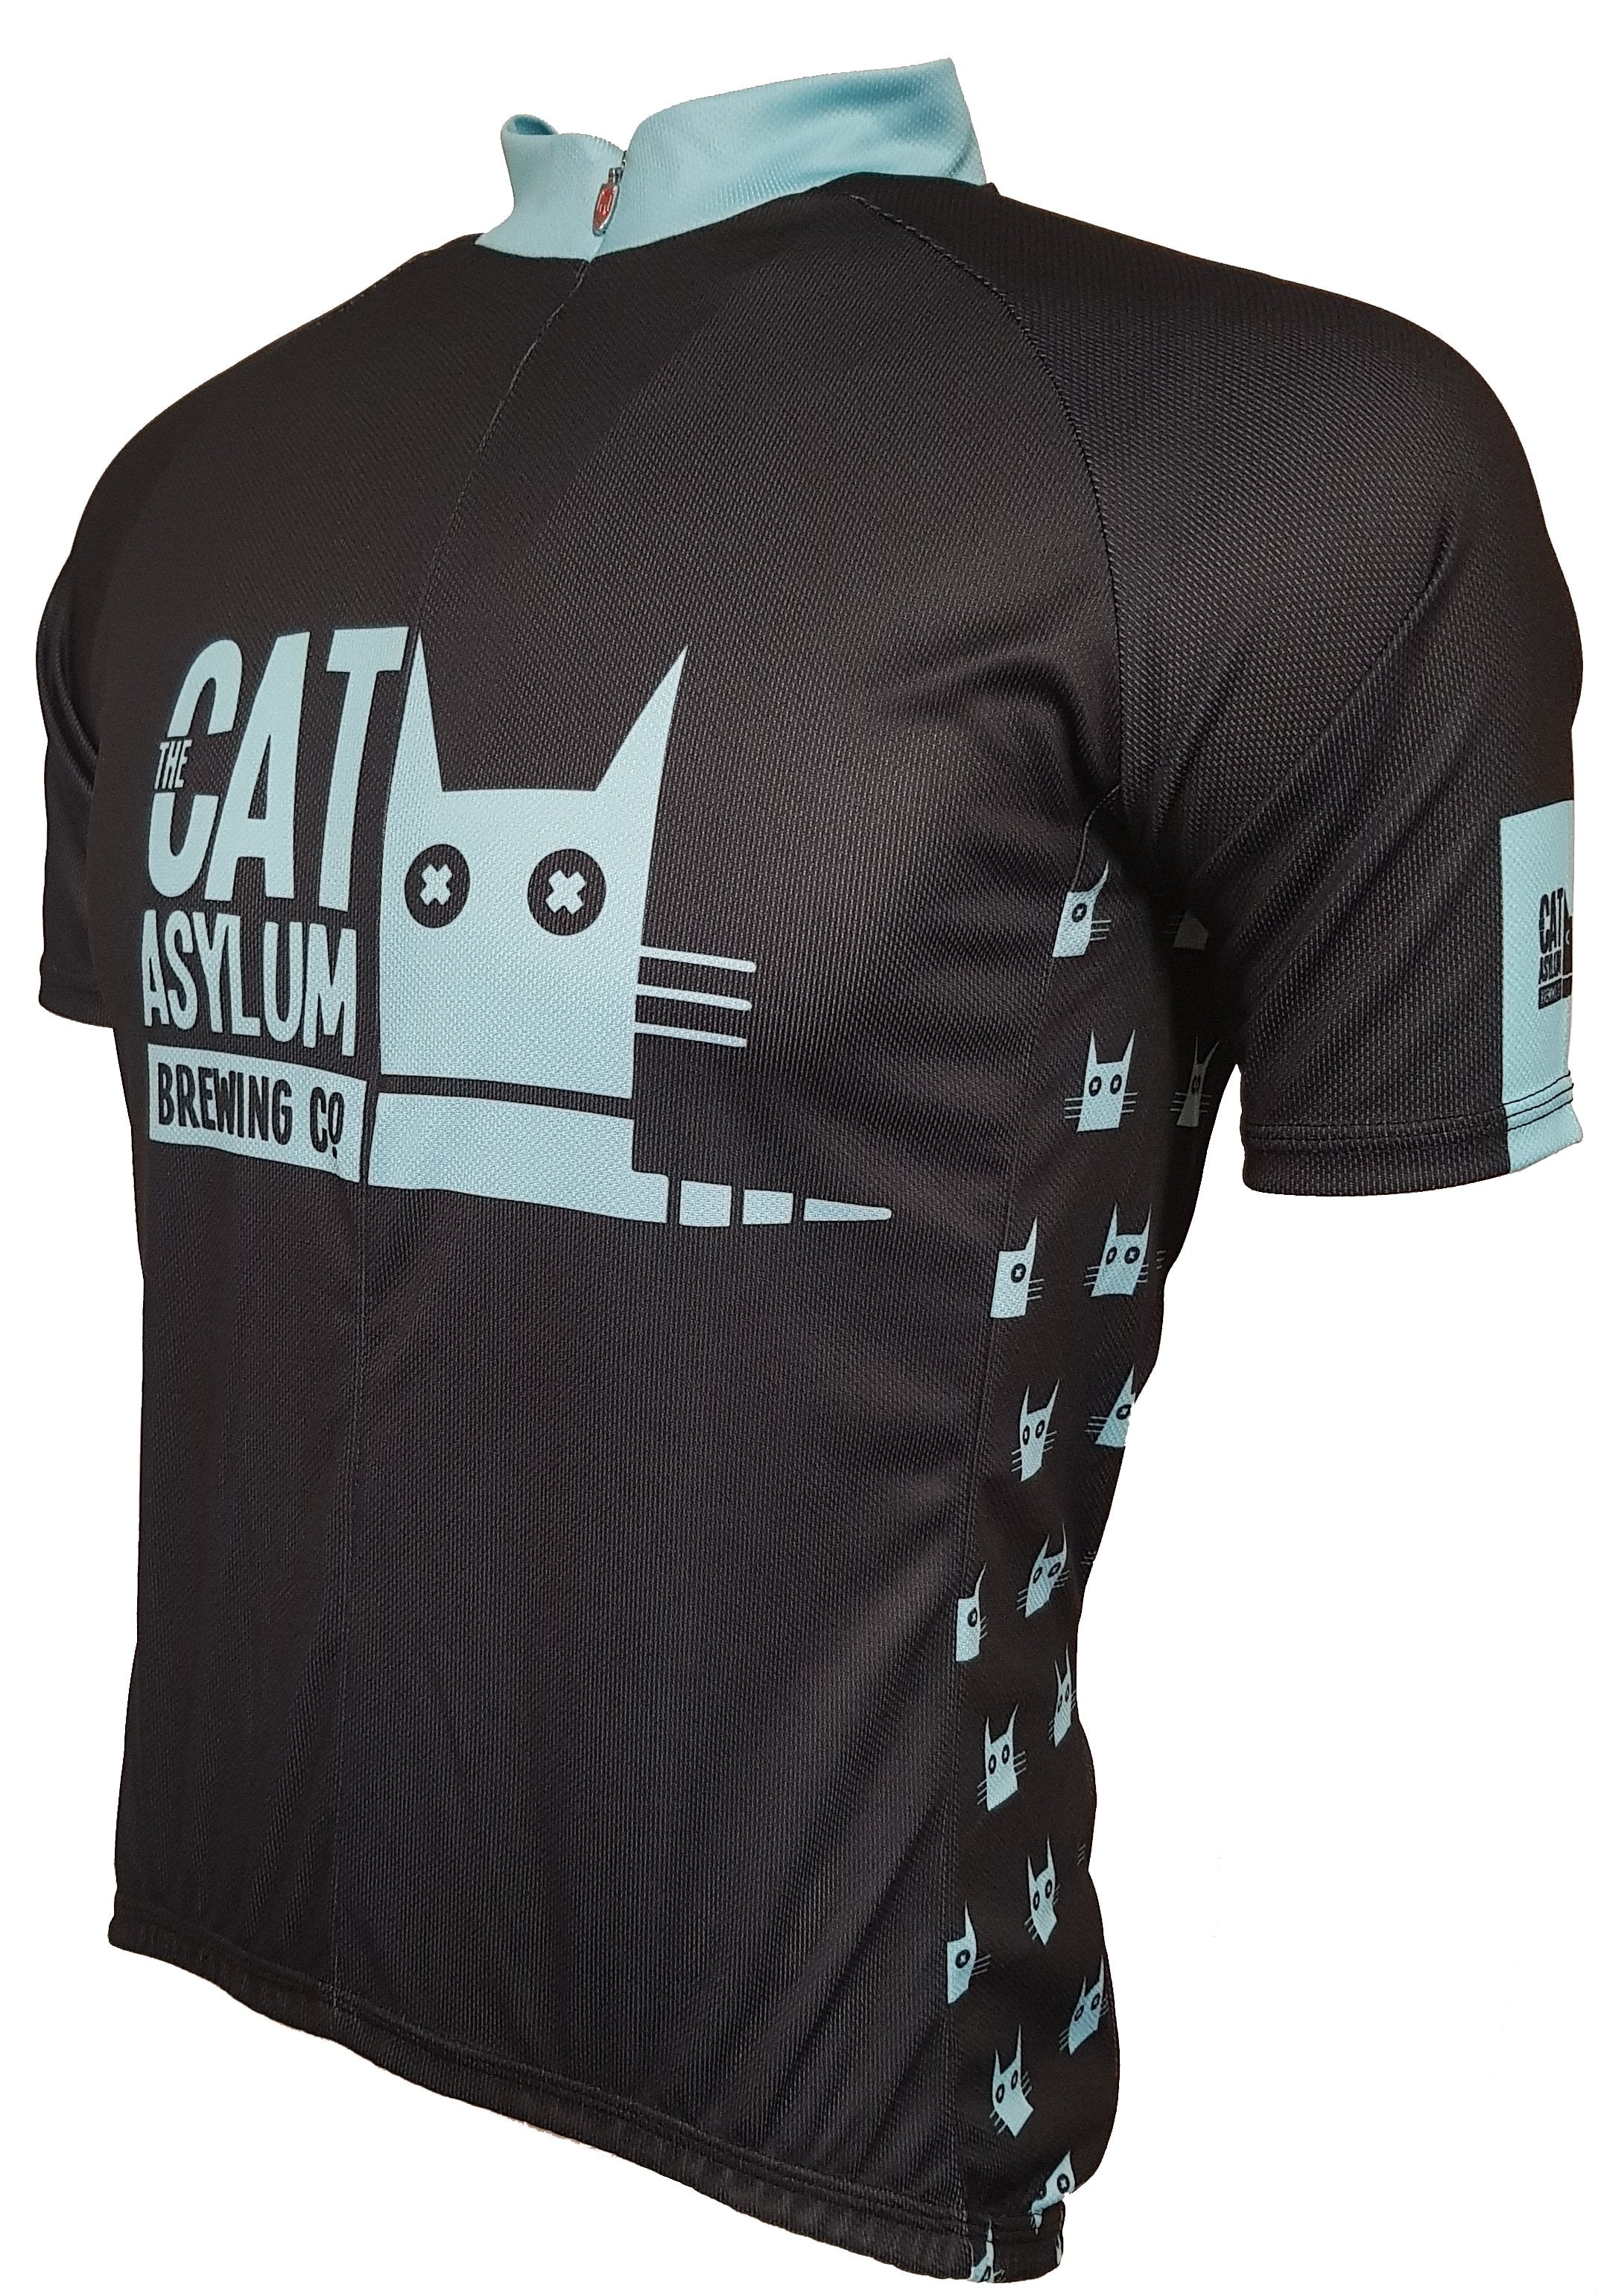 Cat Asylum Road Cycling Jersey Front 